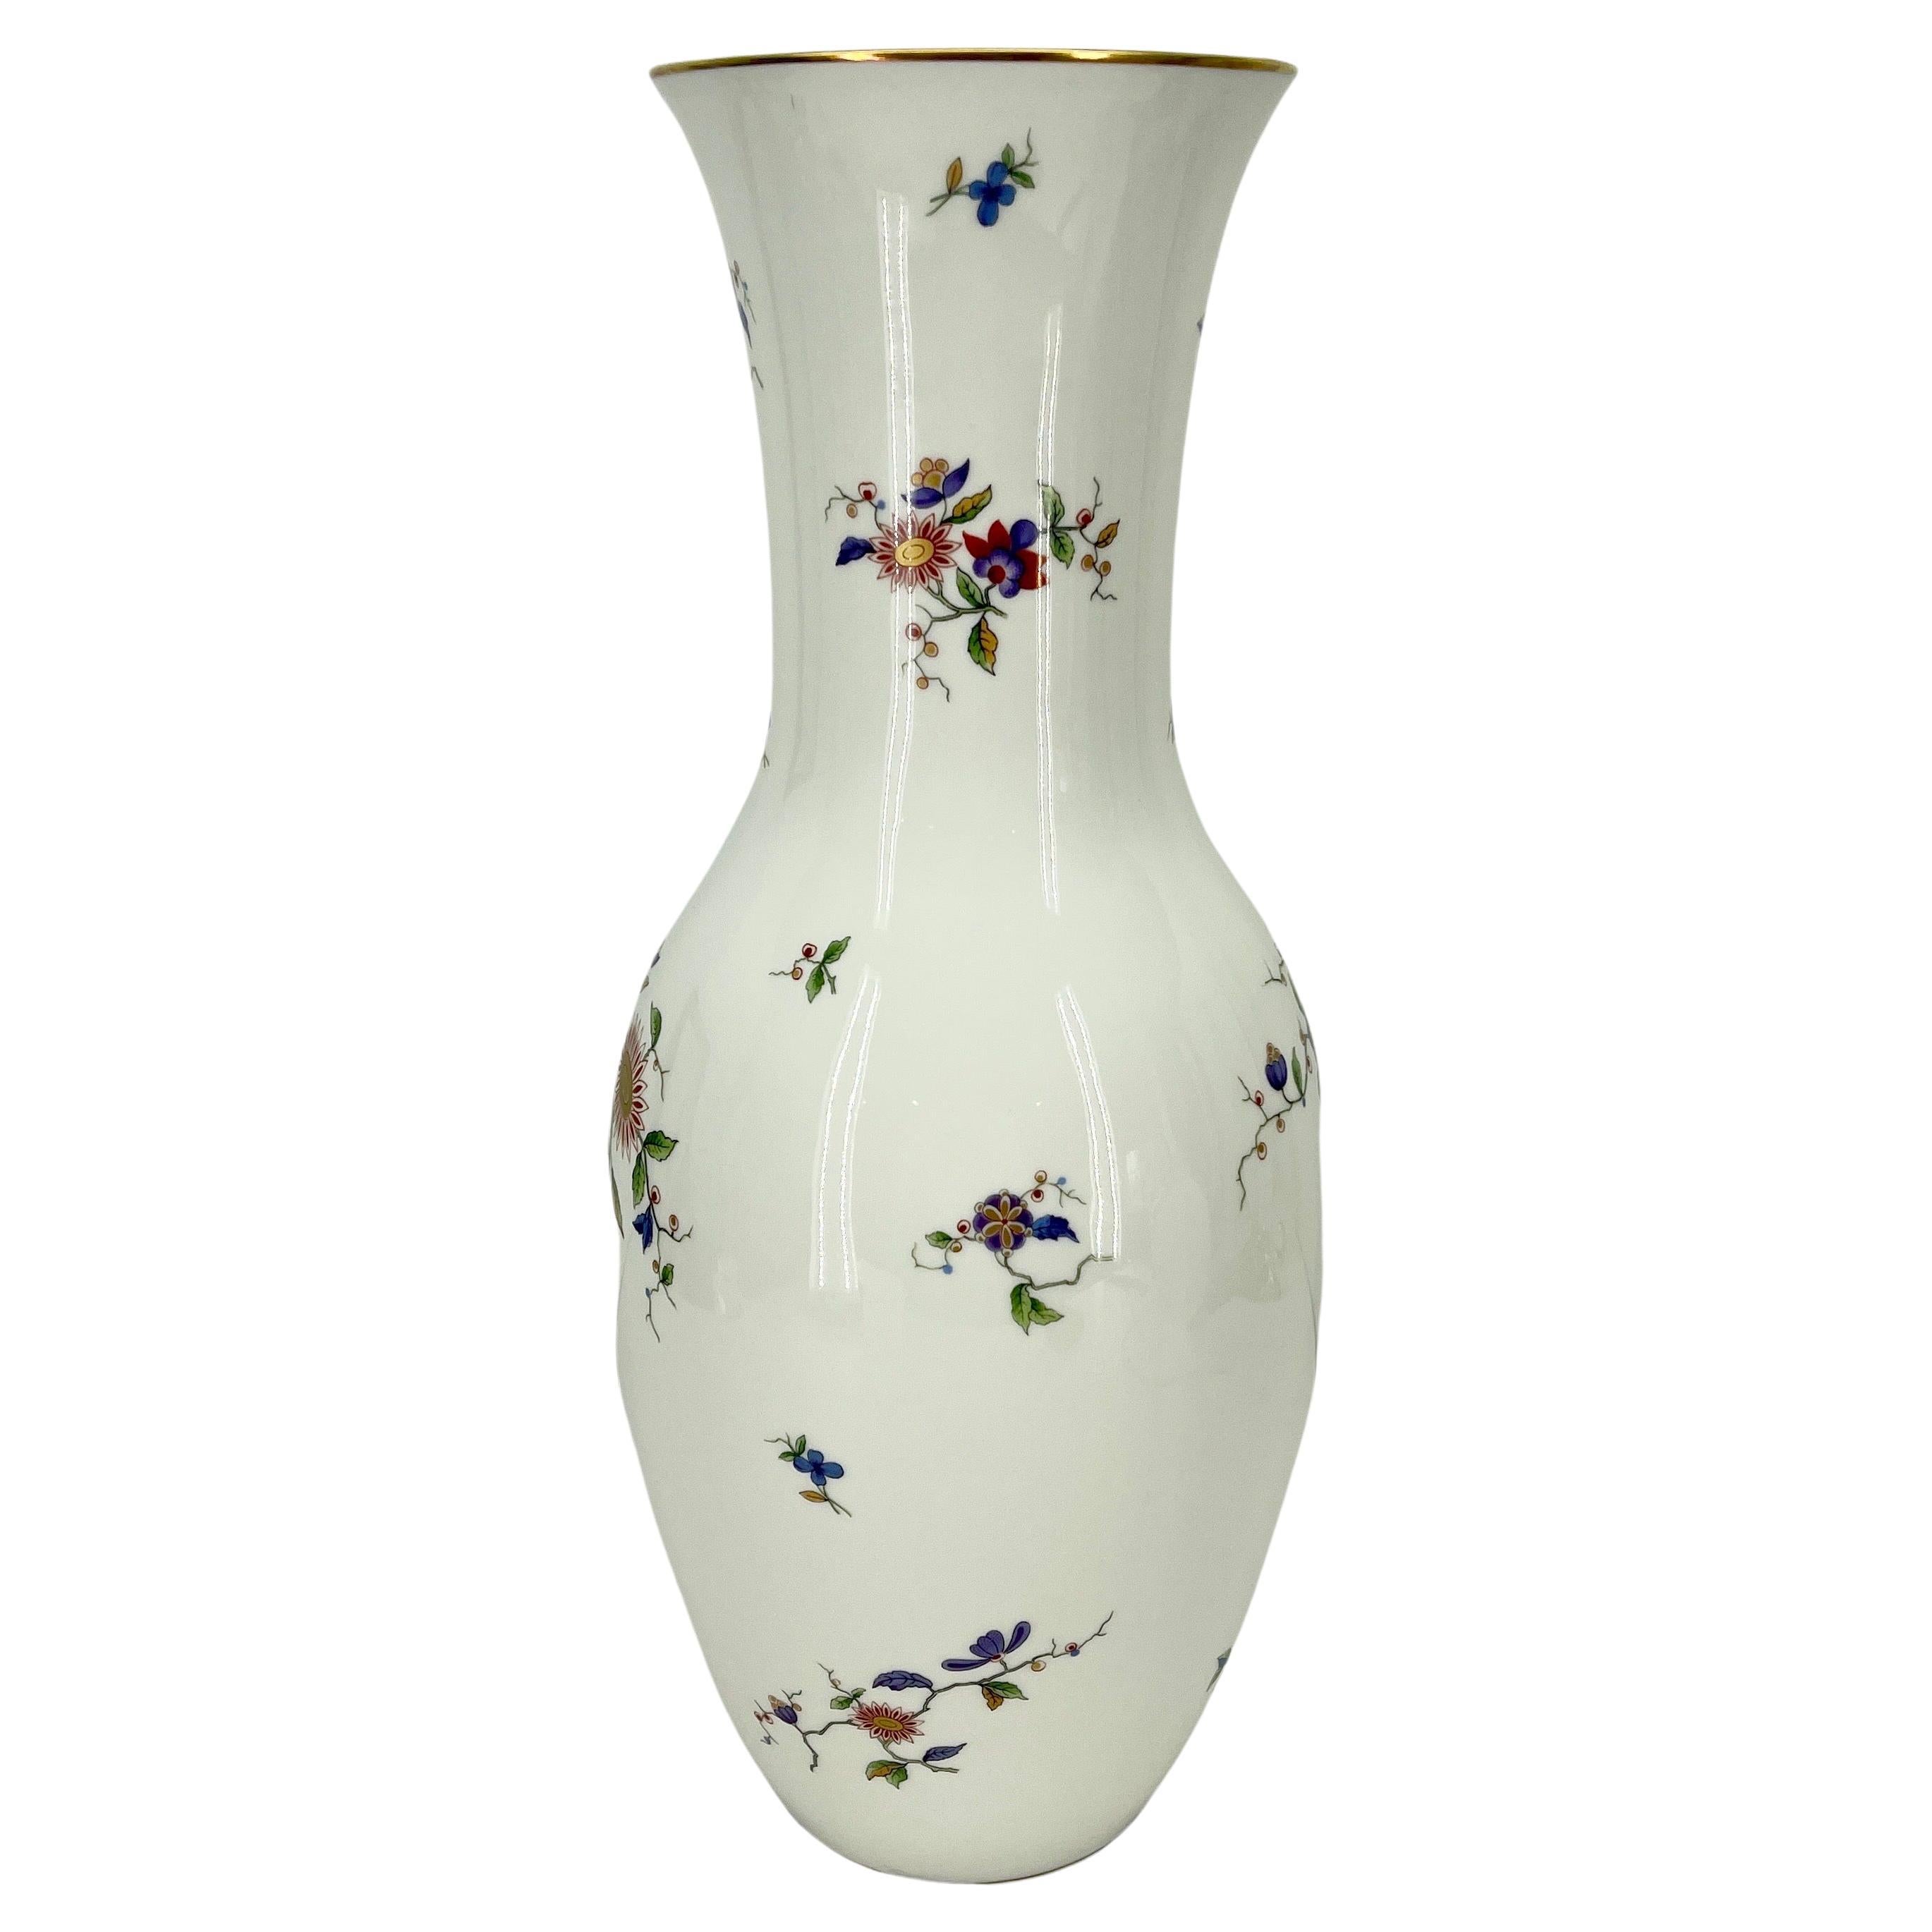 Tall Italian Richard Ginori Porcelain vase with Perfectly Detailed Flower Decorations.
Signed 